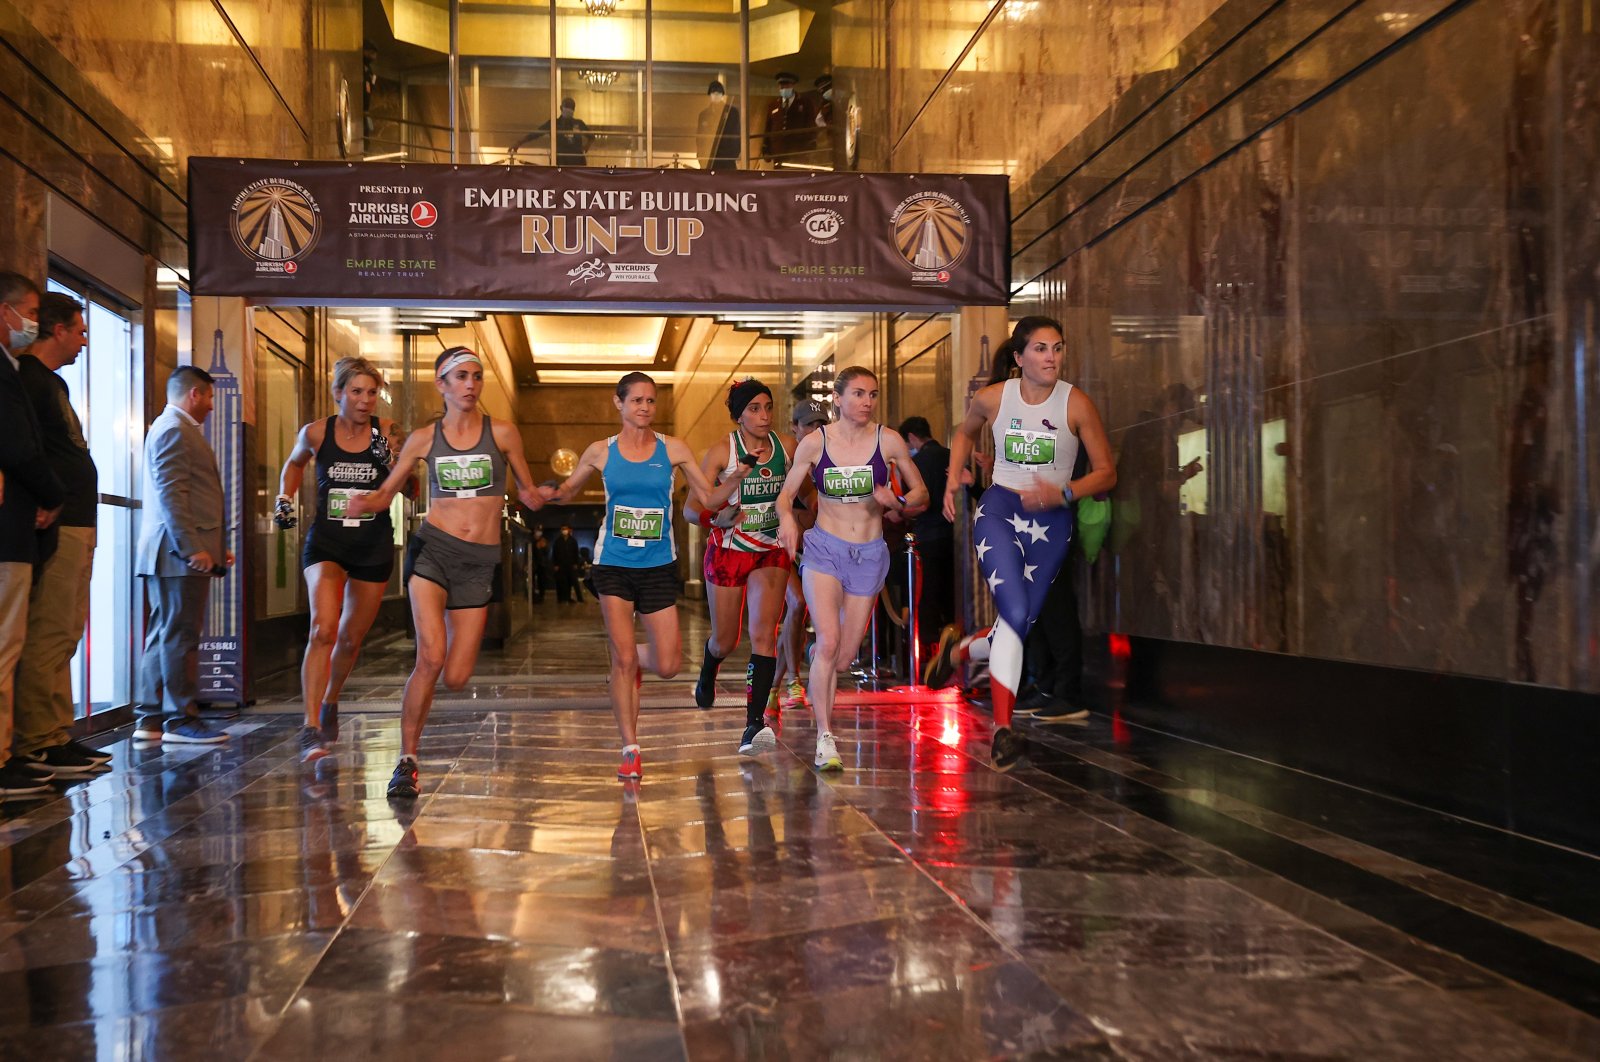 Participants in the Empire State Building Run-Up women's race at the starting line, New York, U.S., Oct. 26, 2021. (AA Photo)